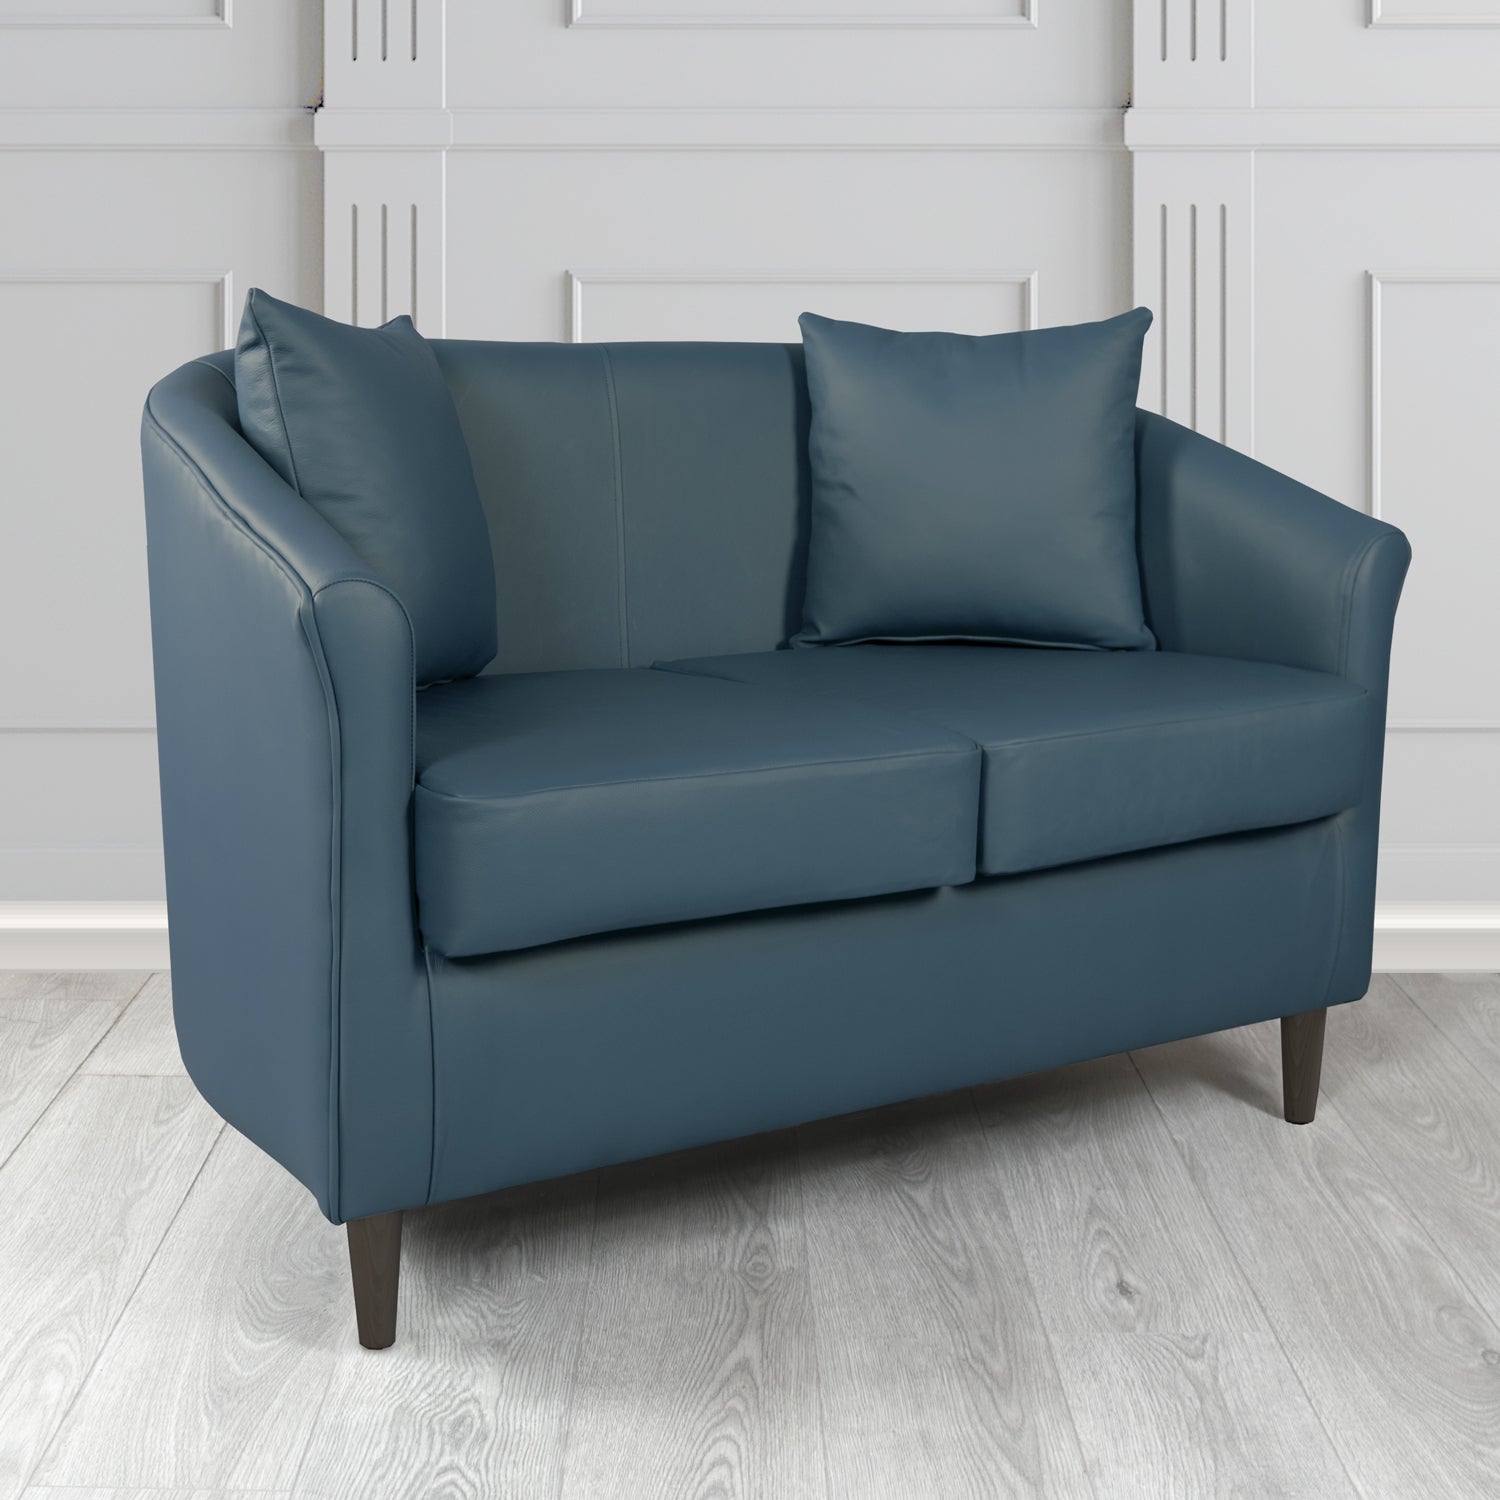 St Tropez Shelly Suffolk Blue Crib 5 Genuine Leather 2 Seater Tub Sofa with Scatter Cushions - The Tub Chair Shop